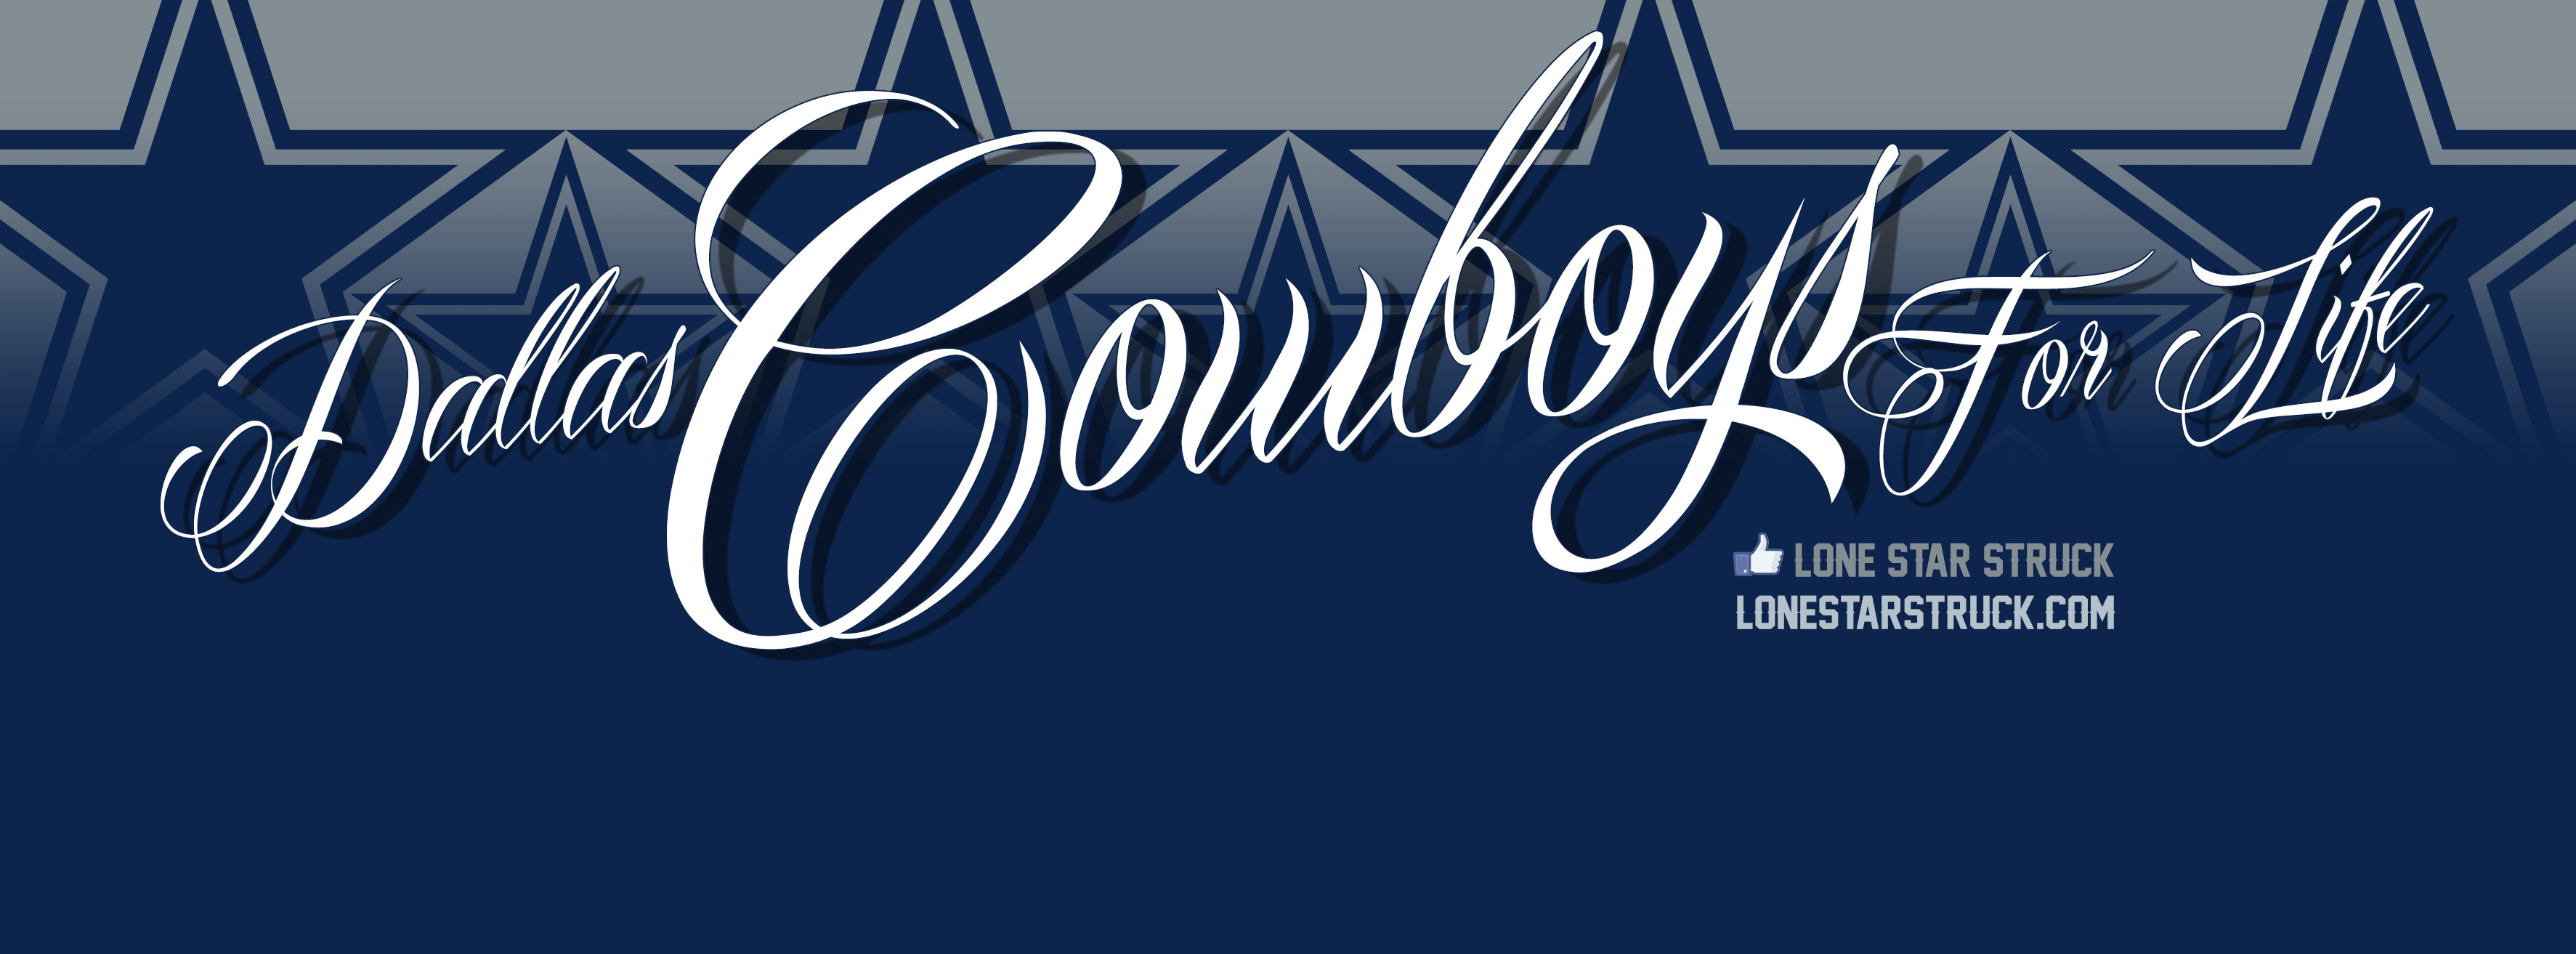 Dallas Cowboys For Life Covers – 6 variations